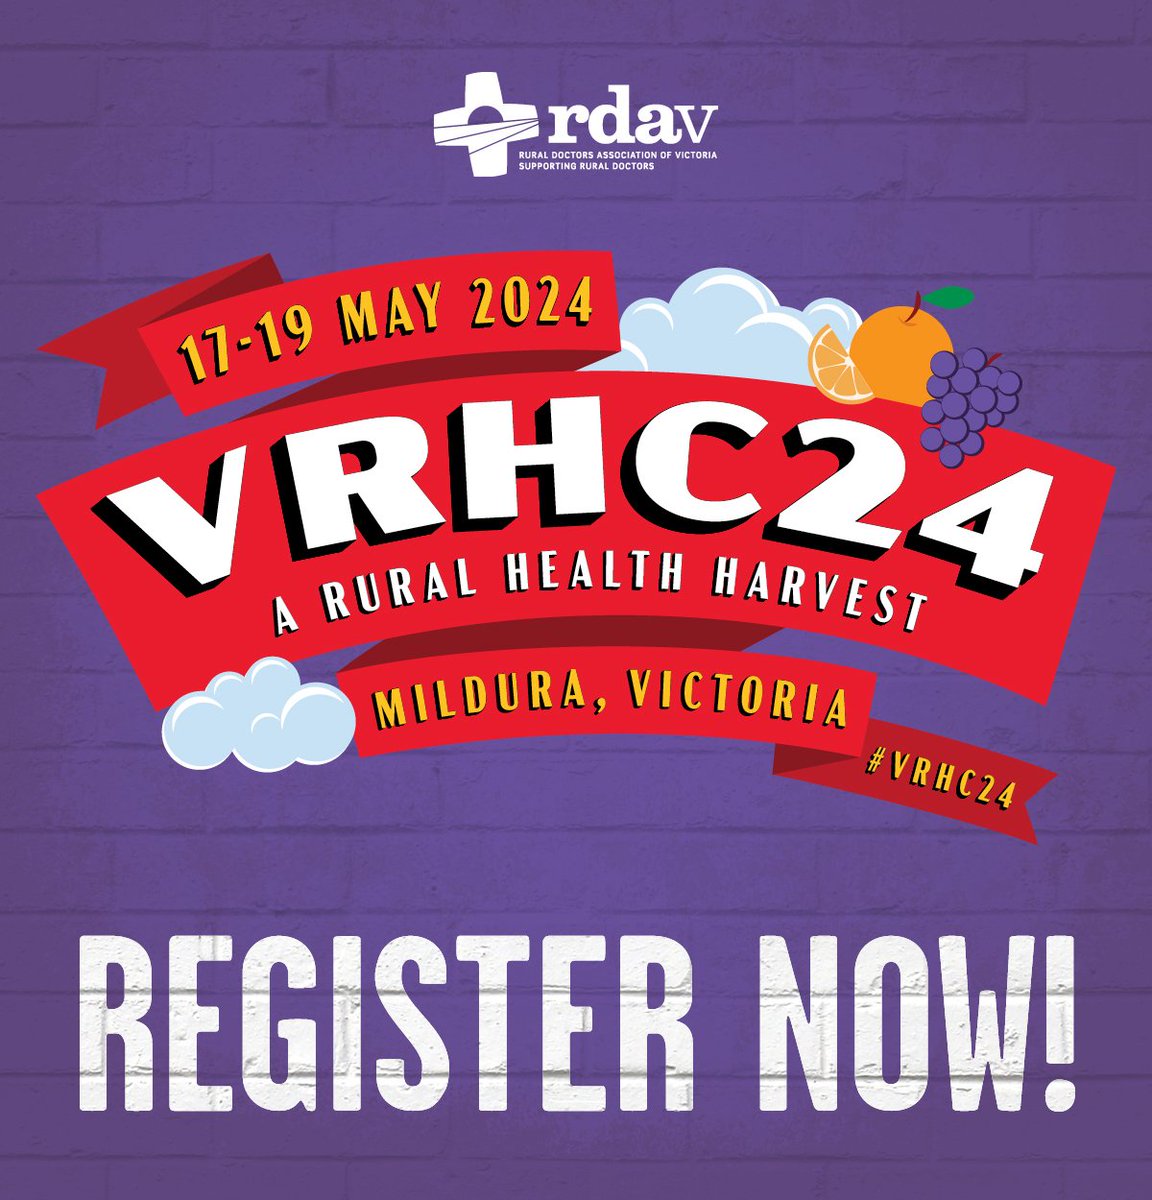 RDAV is looking forward to hosting its first forum for Australian Doctors Trained Overseas at the upcoming Victorian Rural Health Conference in Mildura. Much to discuss with many reviews of Govt policy underway. Register here bit.ly/476kxt4